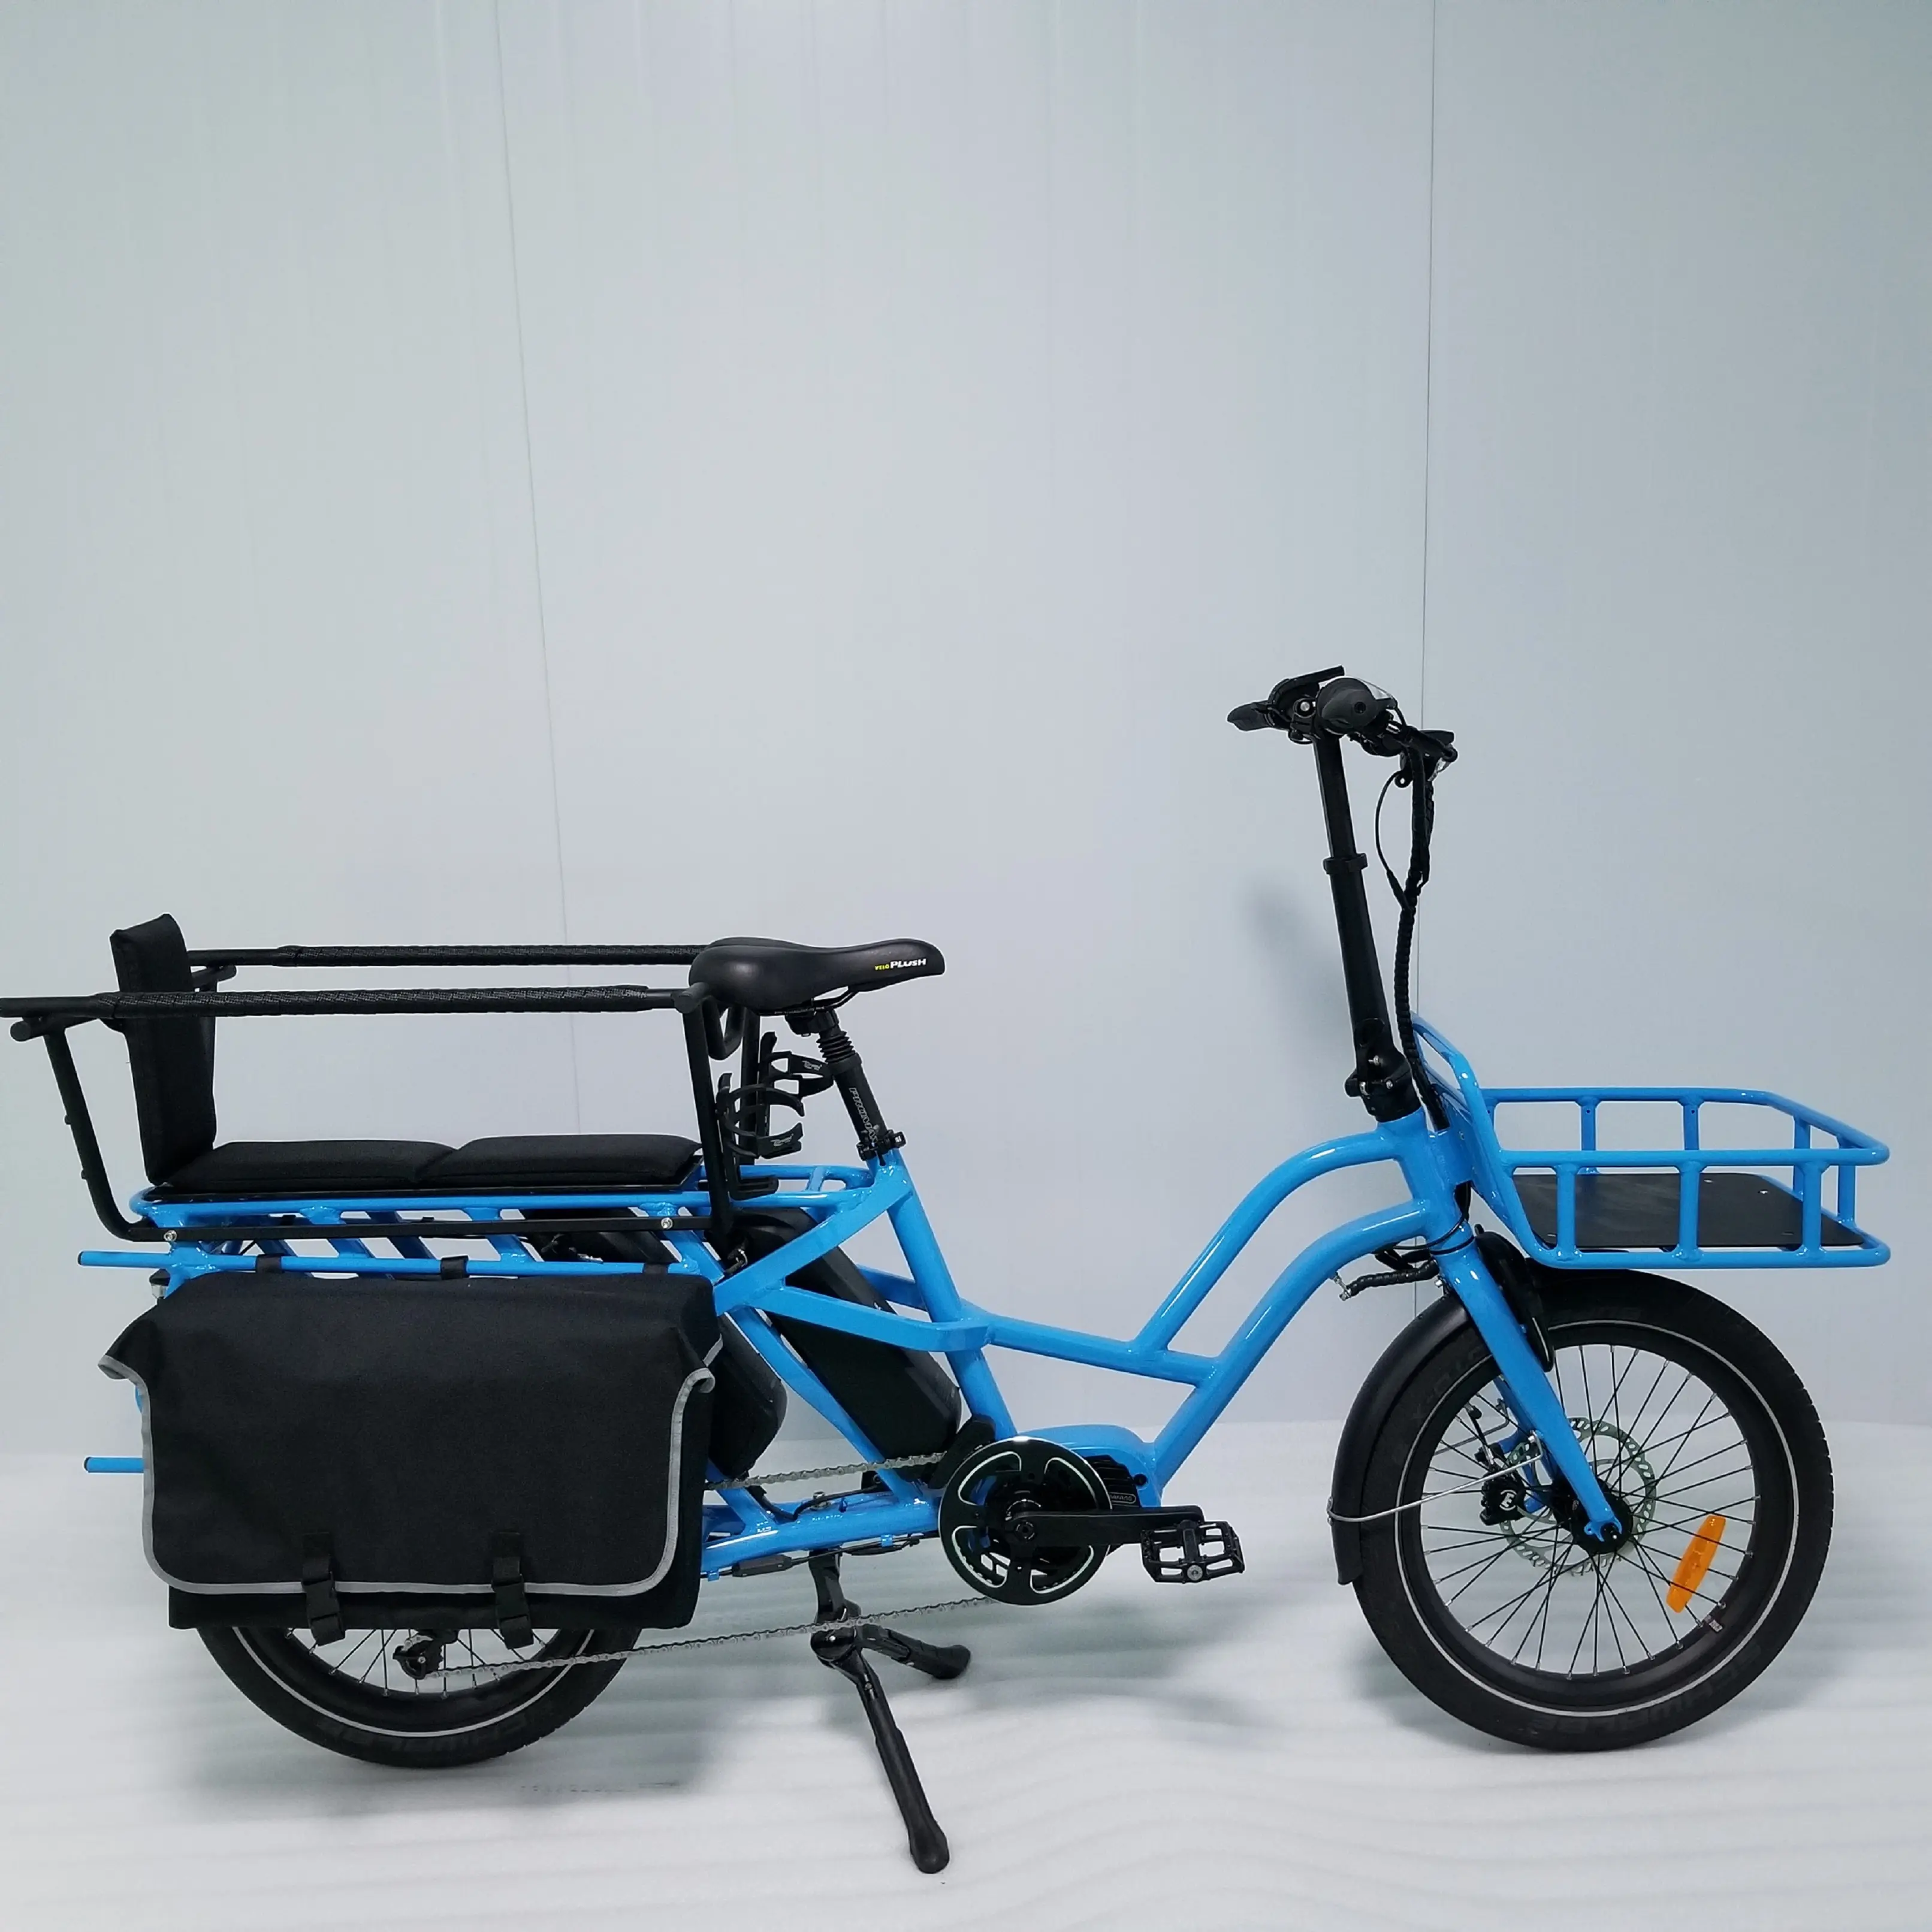 Hot selling 48V 500W electric long-tail bicycle for famliy, 20"inch double battery cargo ebike